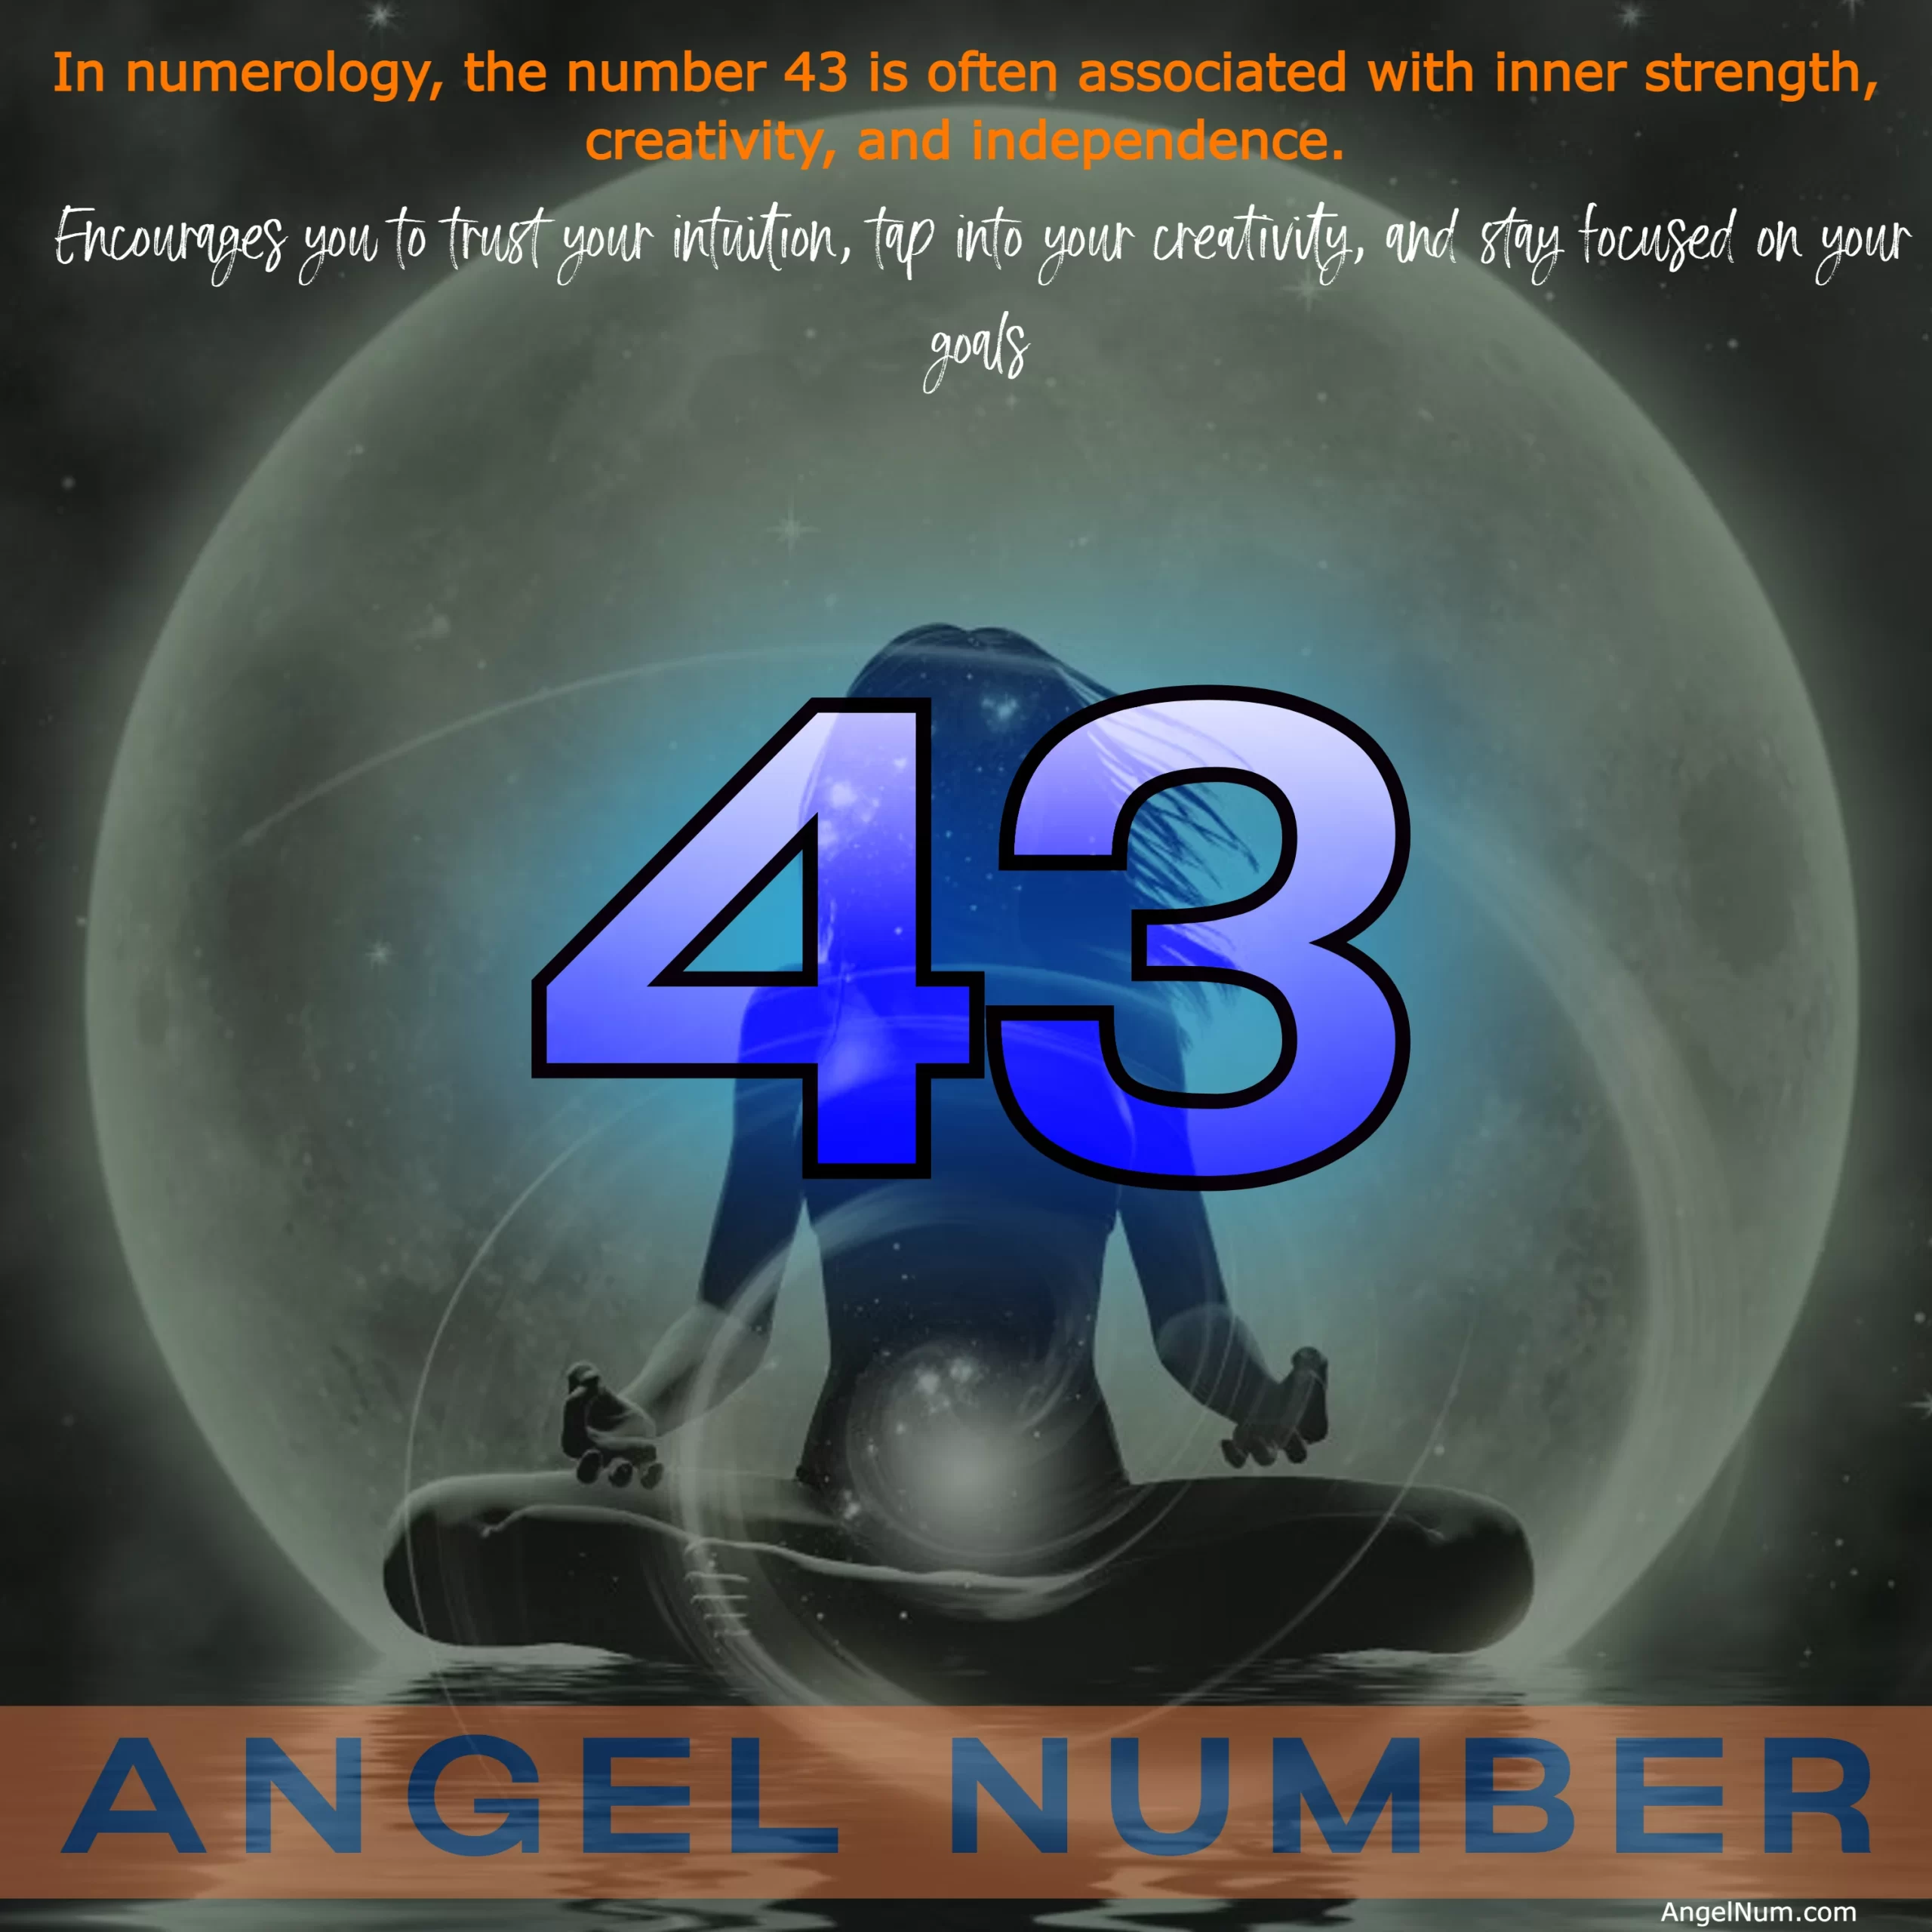 Angel Number 43: Meaning, Symbolism, and Significance